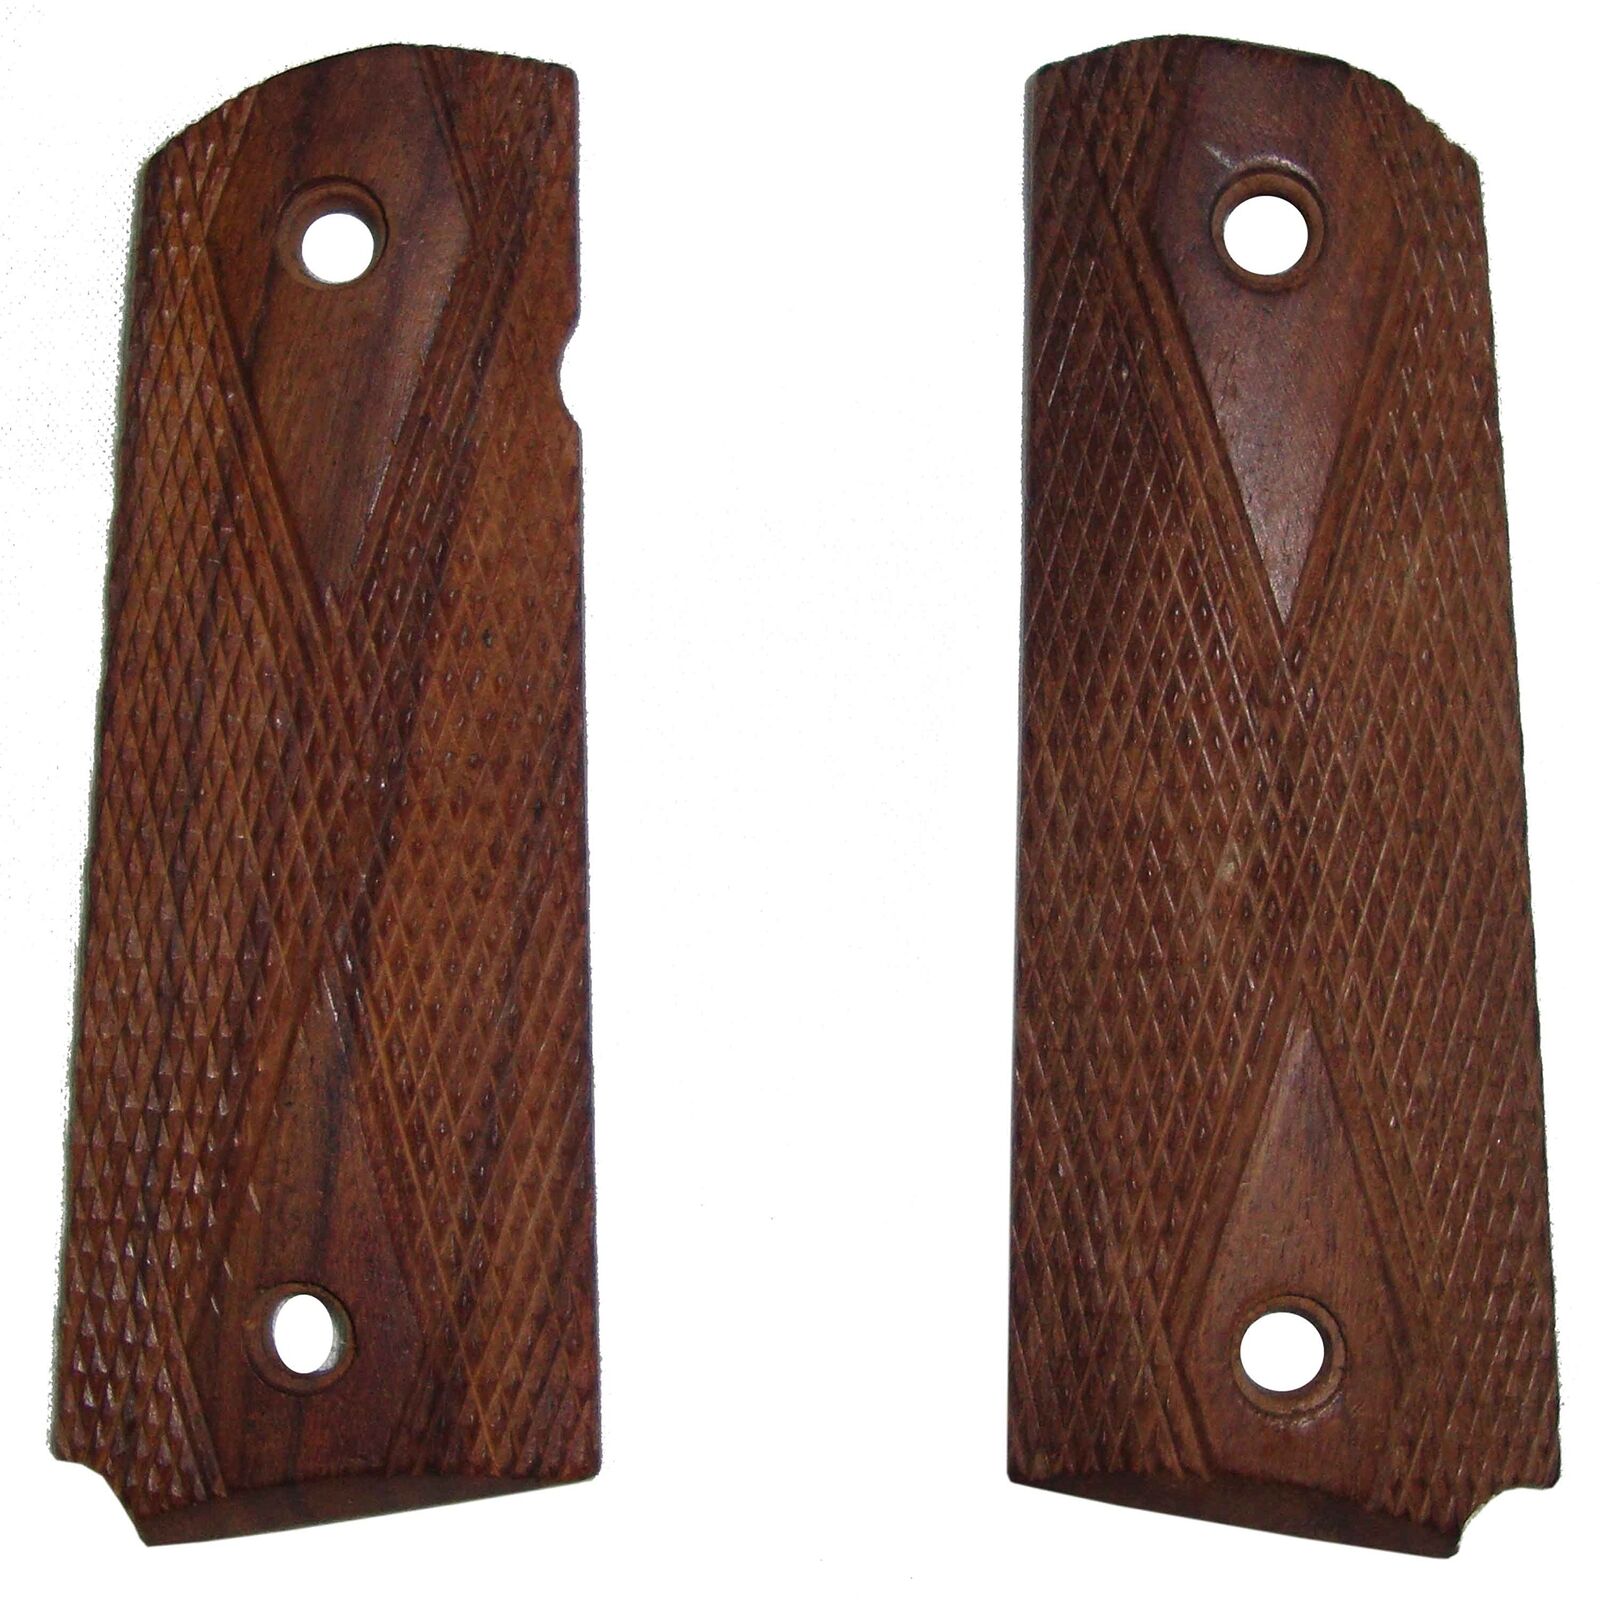 Wwii Us M1911 / 1911 .45 Wooden Pistol Grips - Reproduction